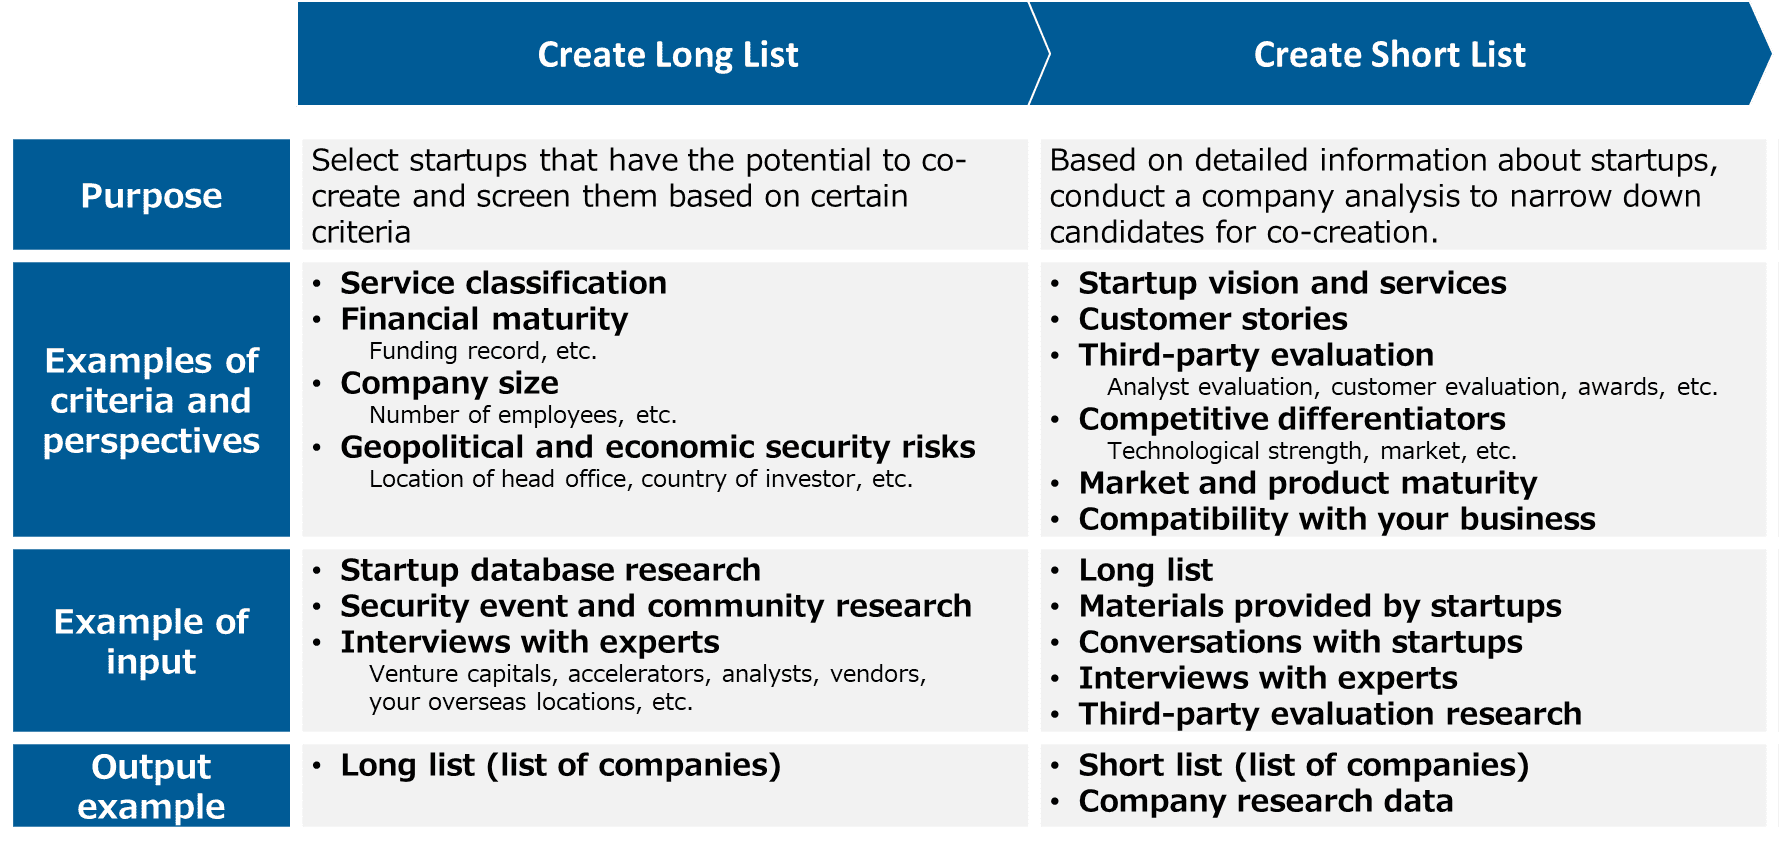 Figure 3. Points to consider when creating a long list and short list